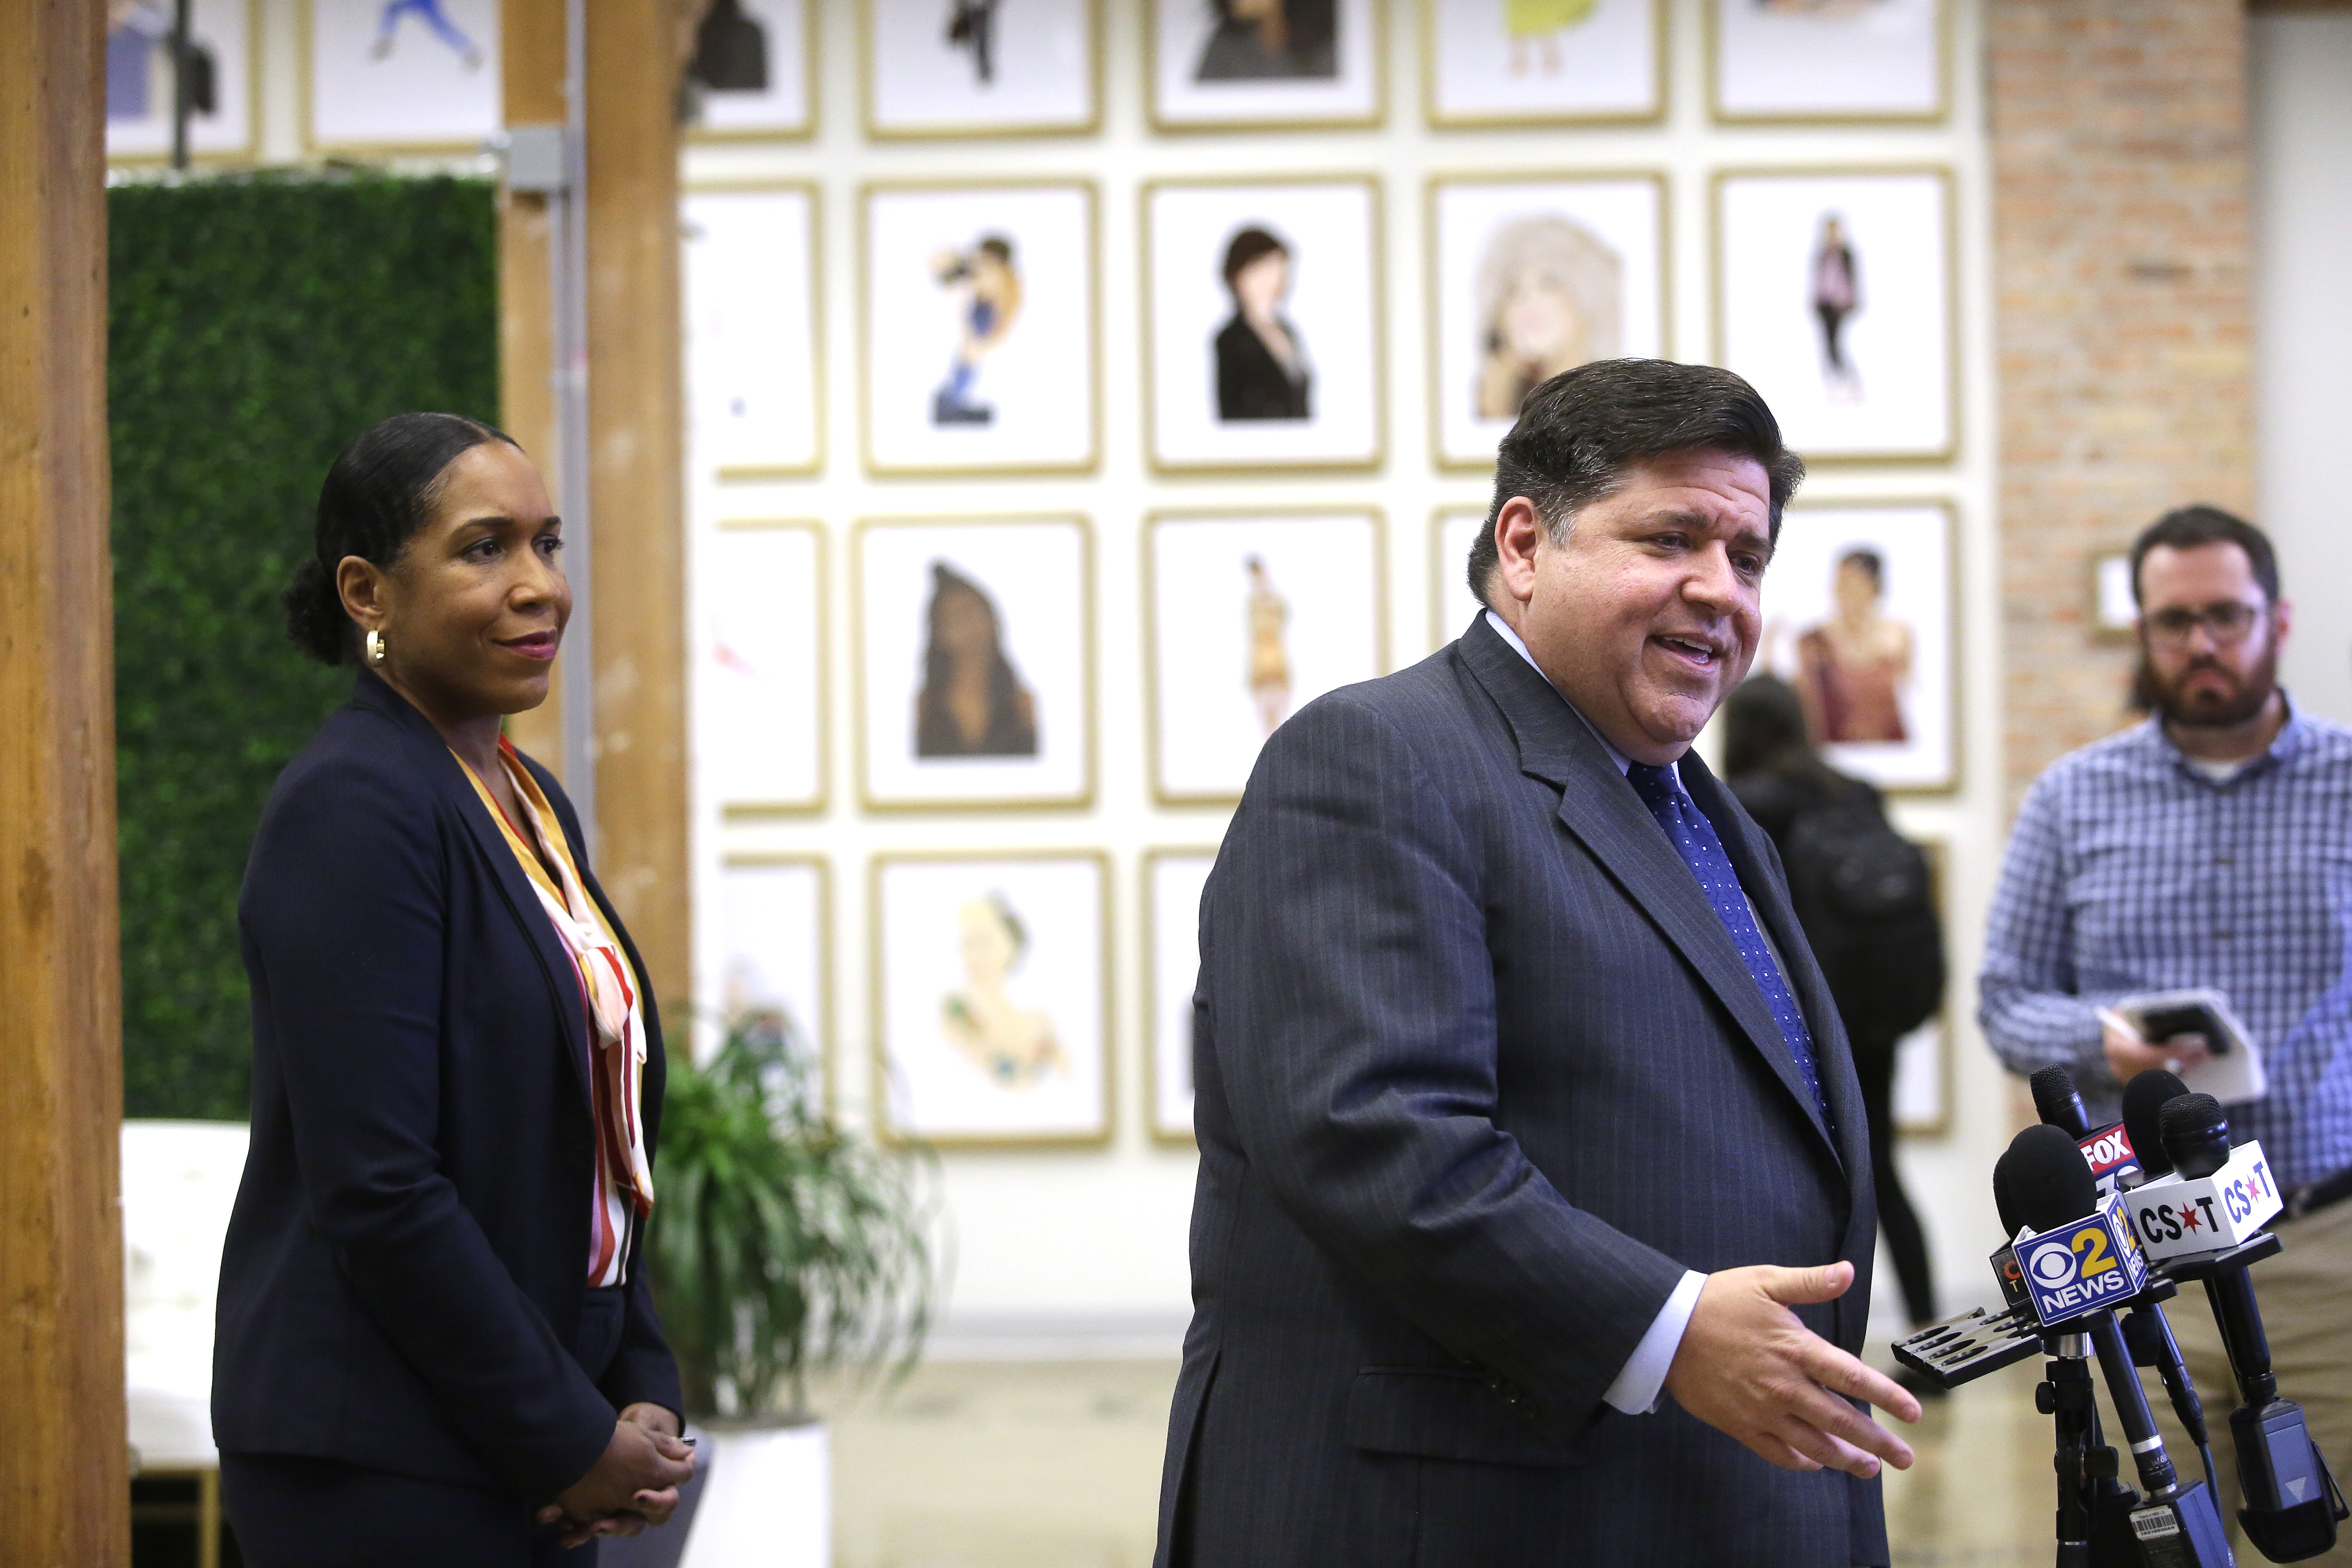 Illinois gubernatorial candidate J.B. Pritzker stands with his Illinois gubernatorial Lieutenant Governor candidate Juliana Stratton as he speaks to reporters after sitting with high school students during a round table discussion at a creative workspace for women on October 1, 2018 in Chicago, Illinois. (Photo by Joshua Lott/Getty Images)